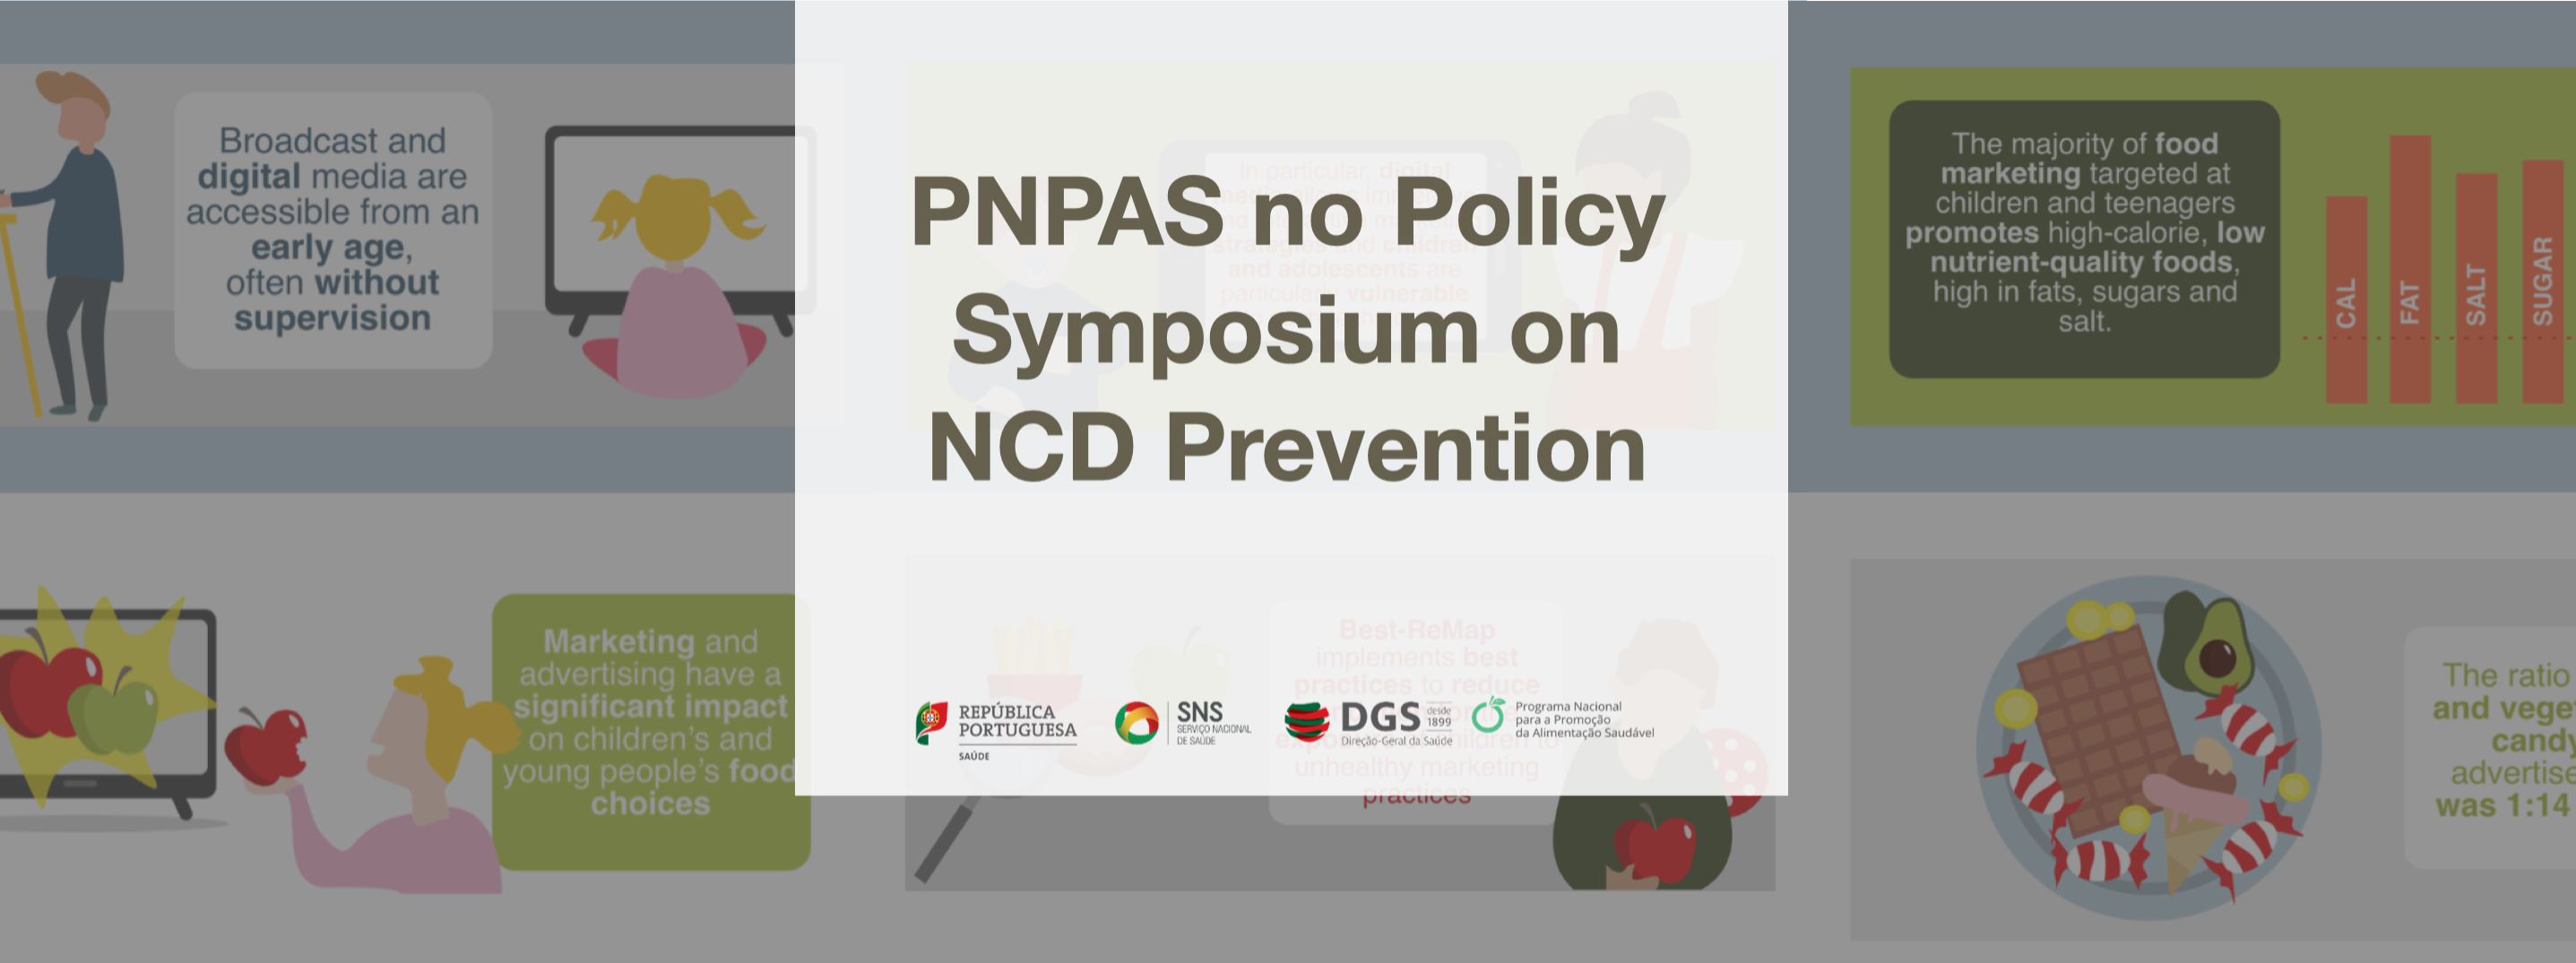 PNPAS no Policy Symposium on NCD Prevention